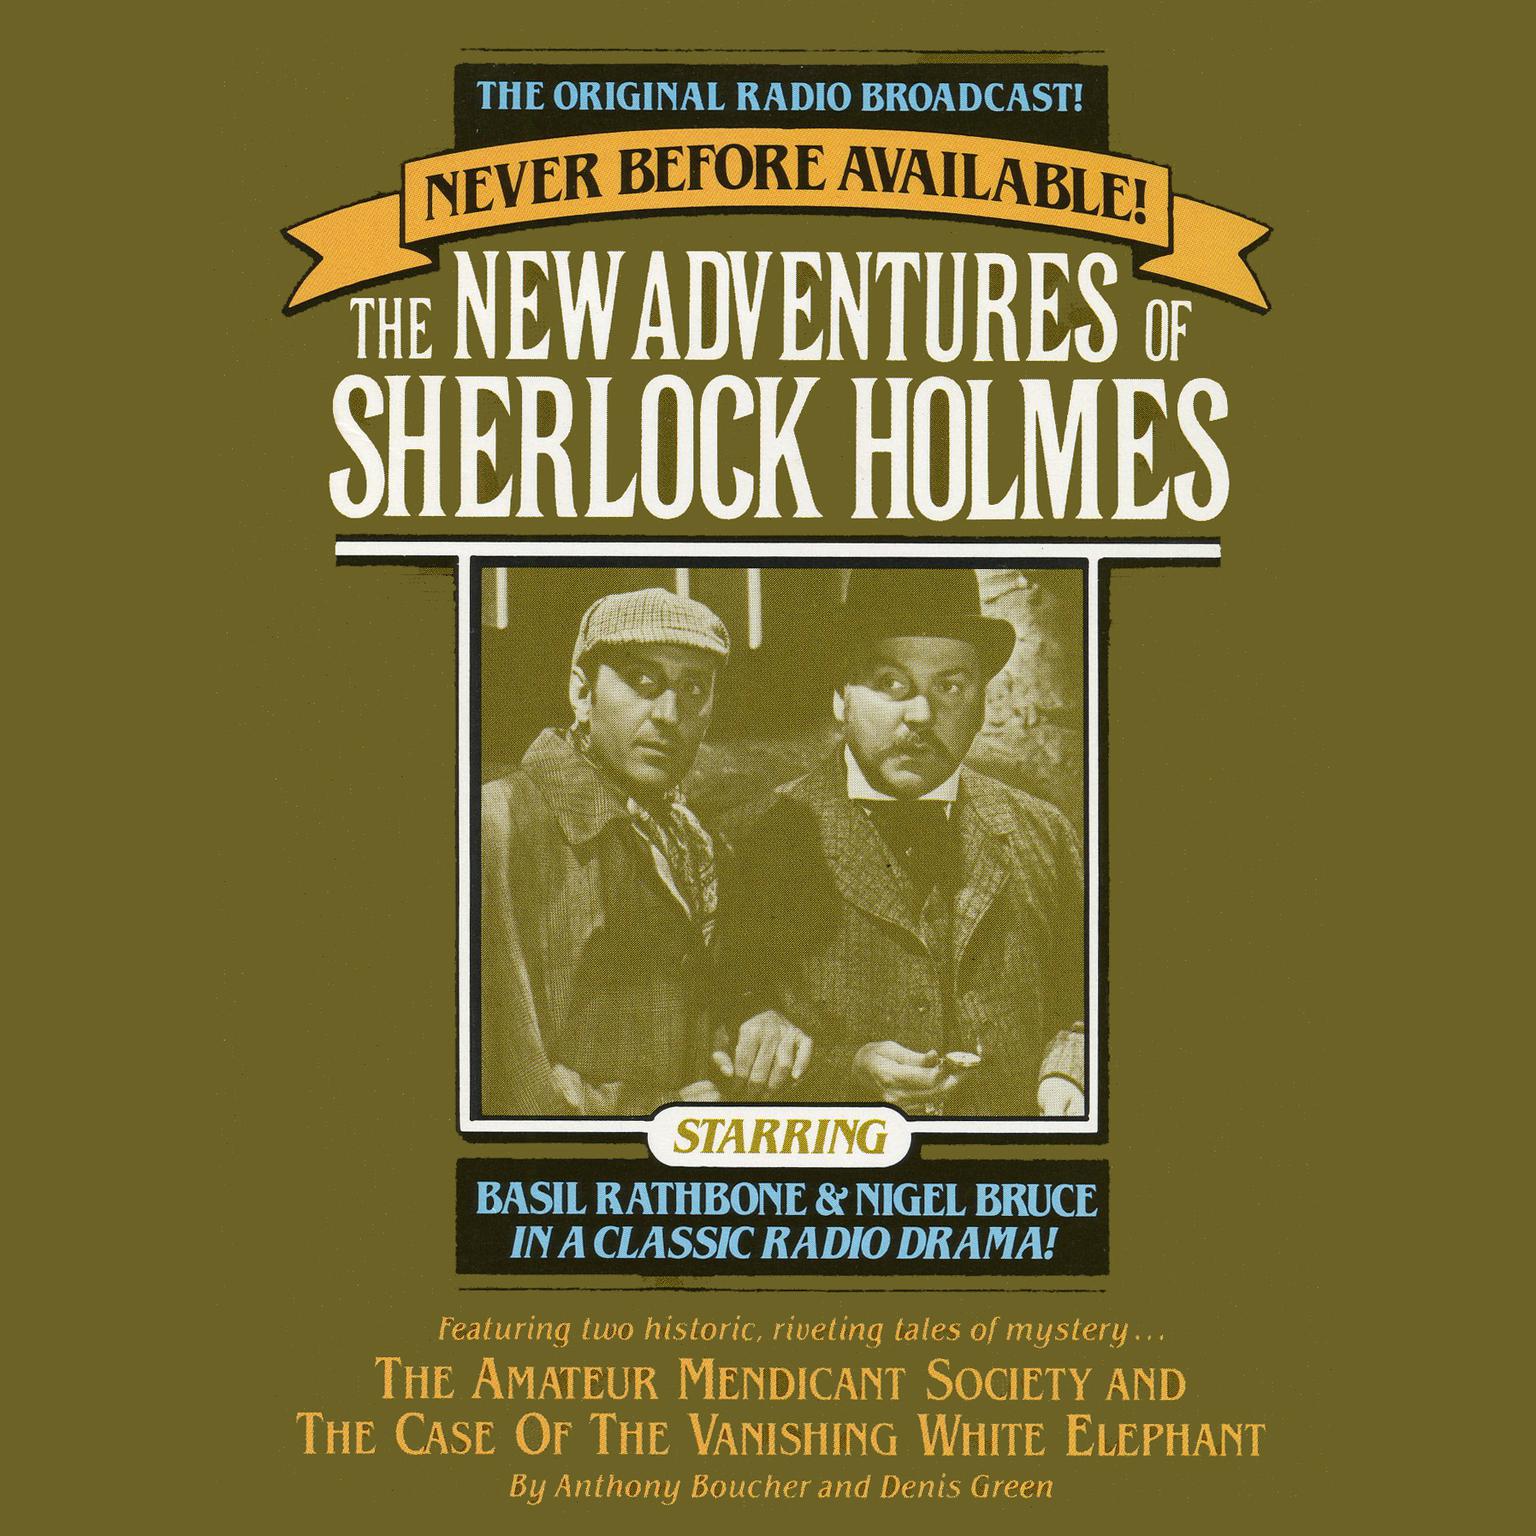 The Amateur Mendicant Society and Case of the Vanishing White Elephant (Abridged): The New Adventures of Sherlock Holmes, Episode 5 Audiobook, by Anthony Boucher